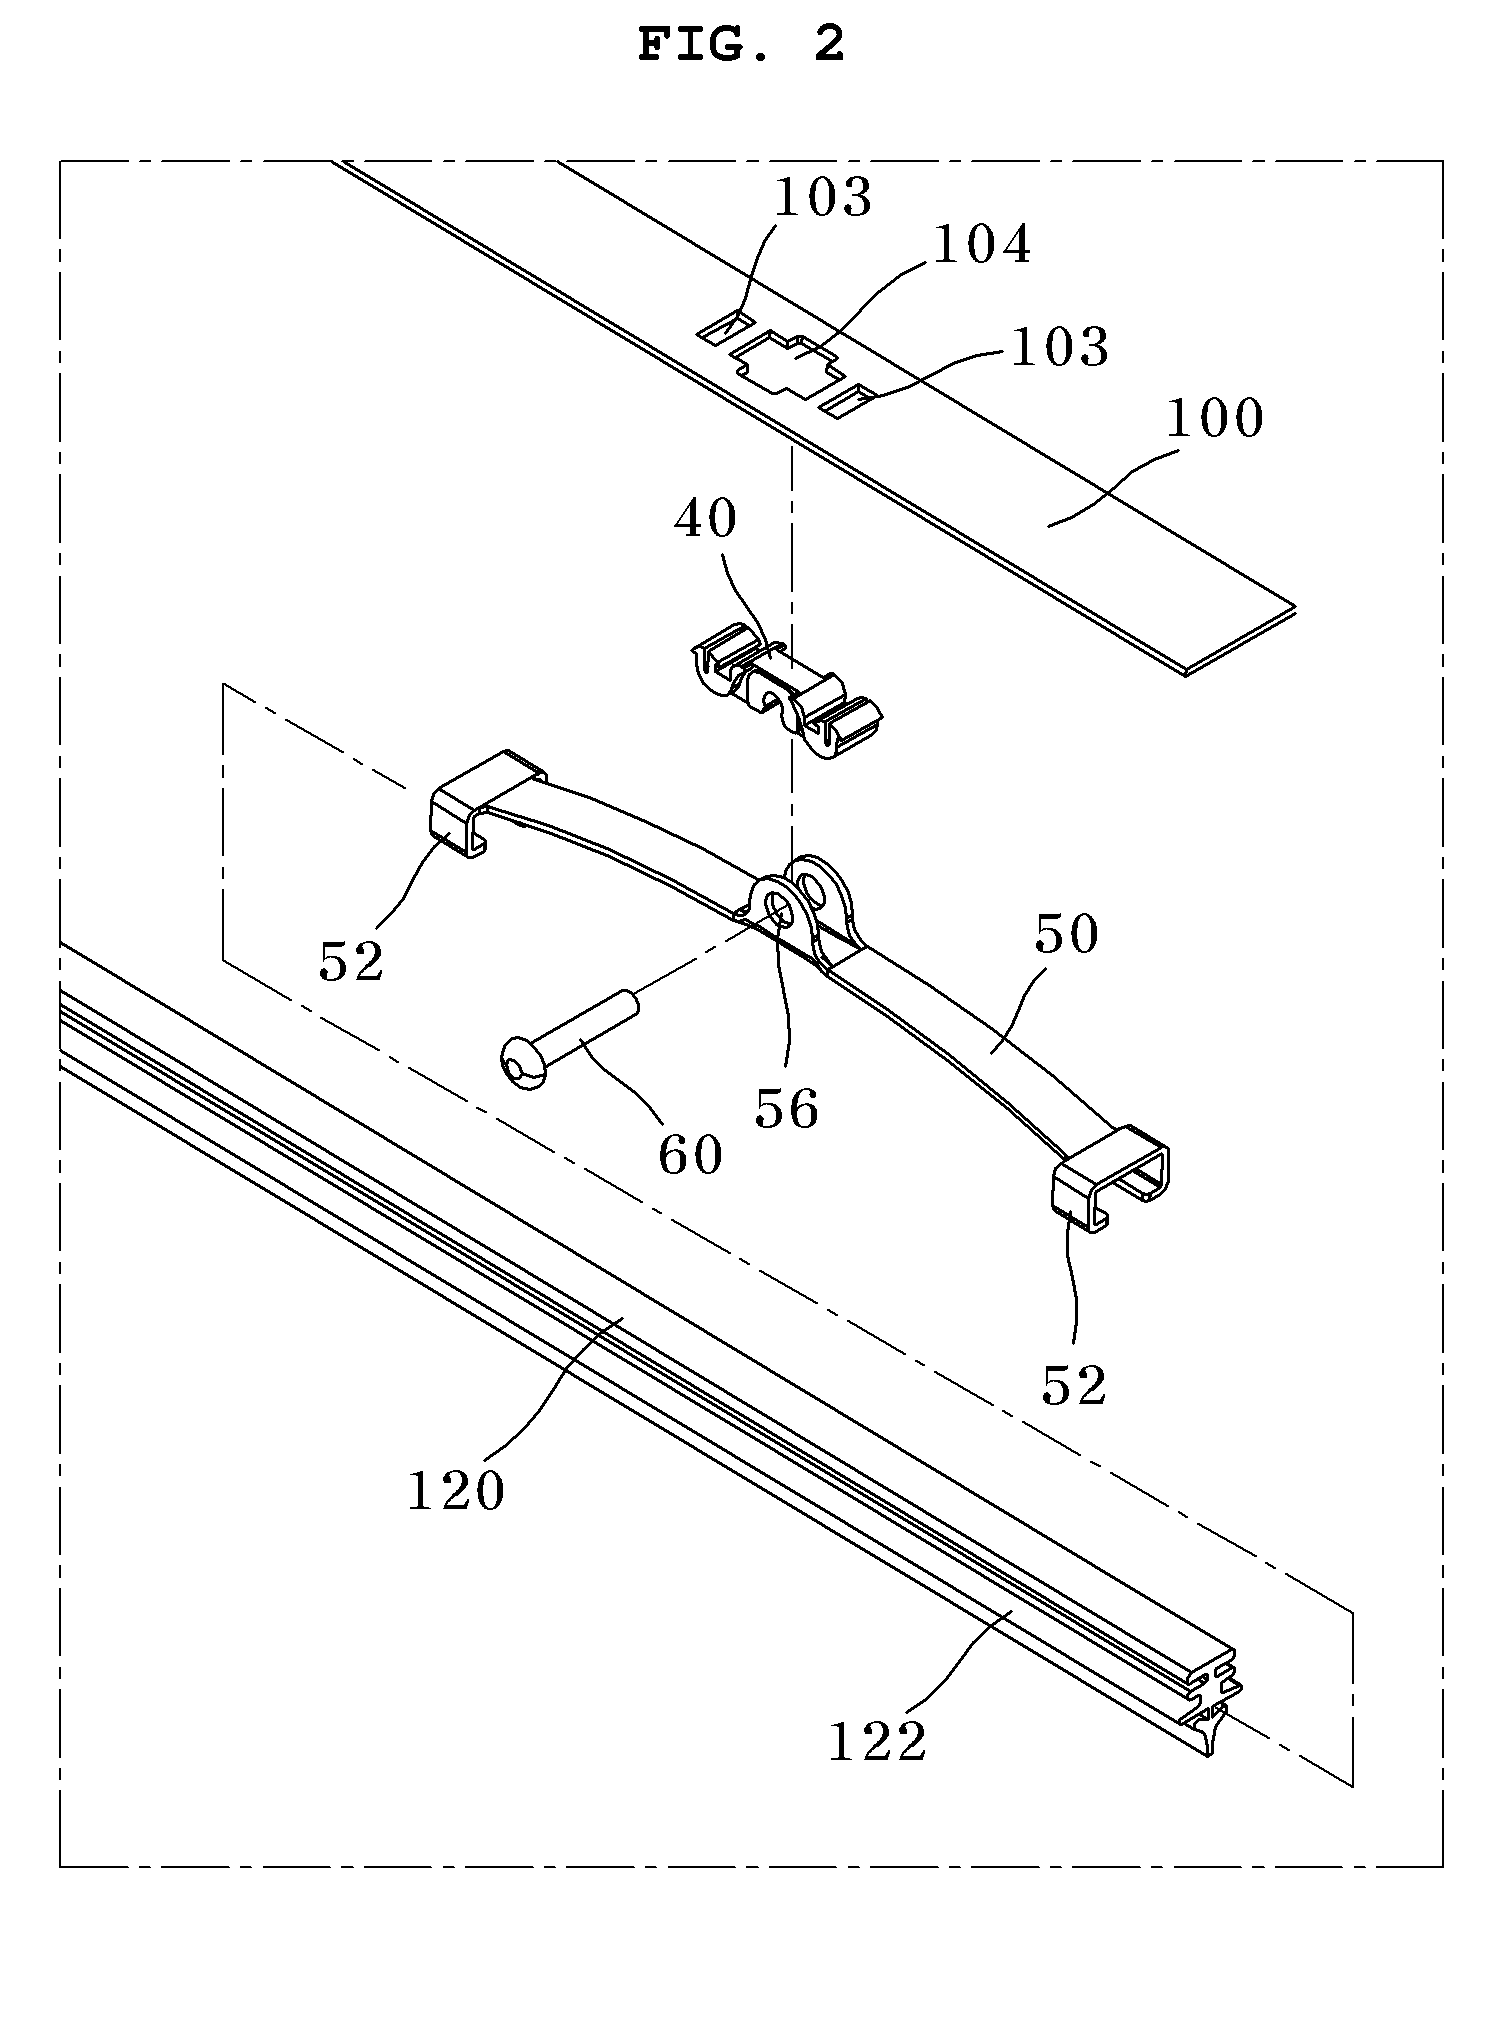 Wiper Blade Assembly Having Rotatable Auxiliary Beam